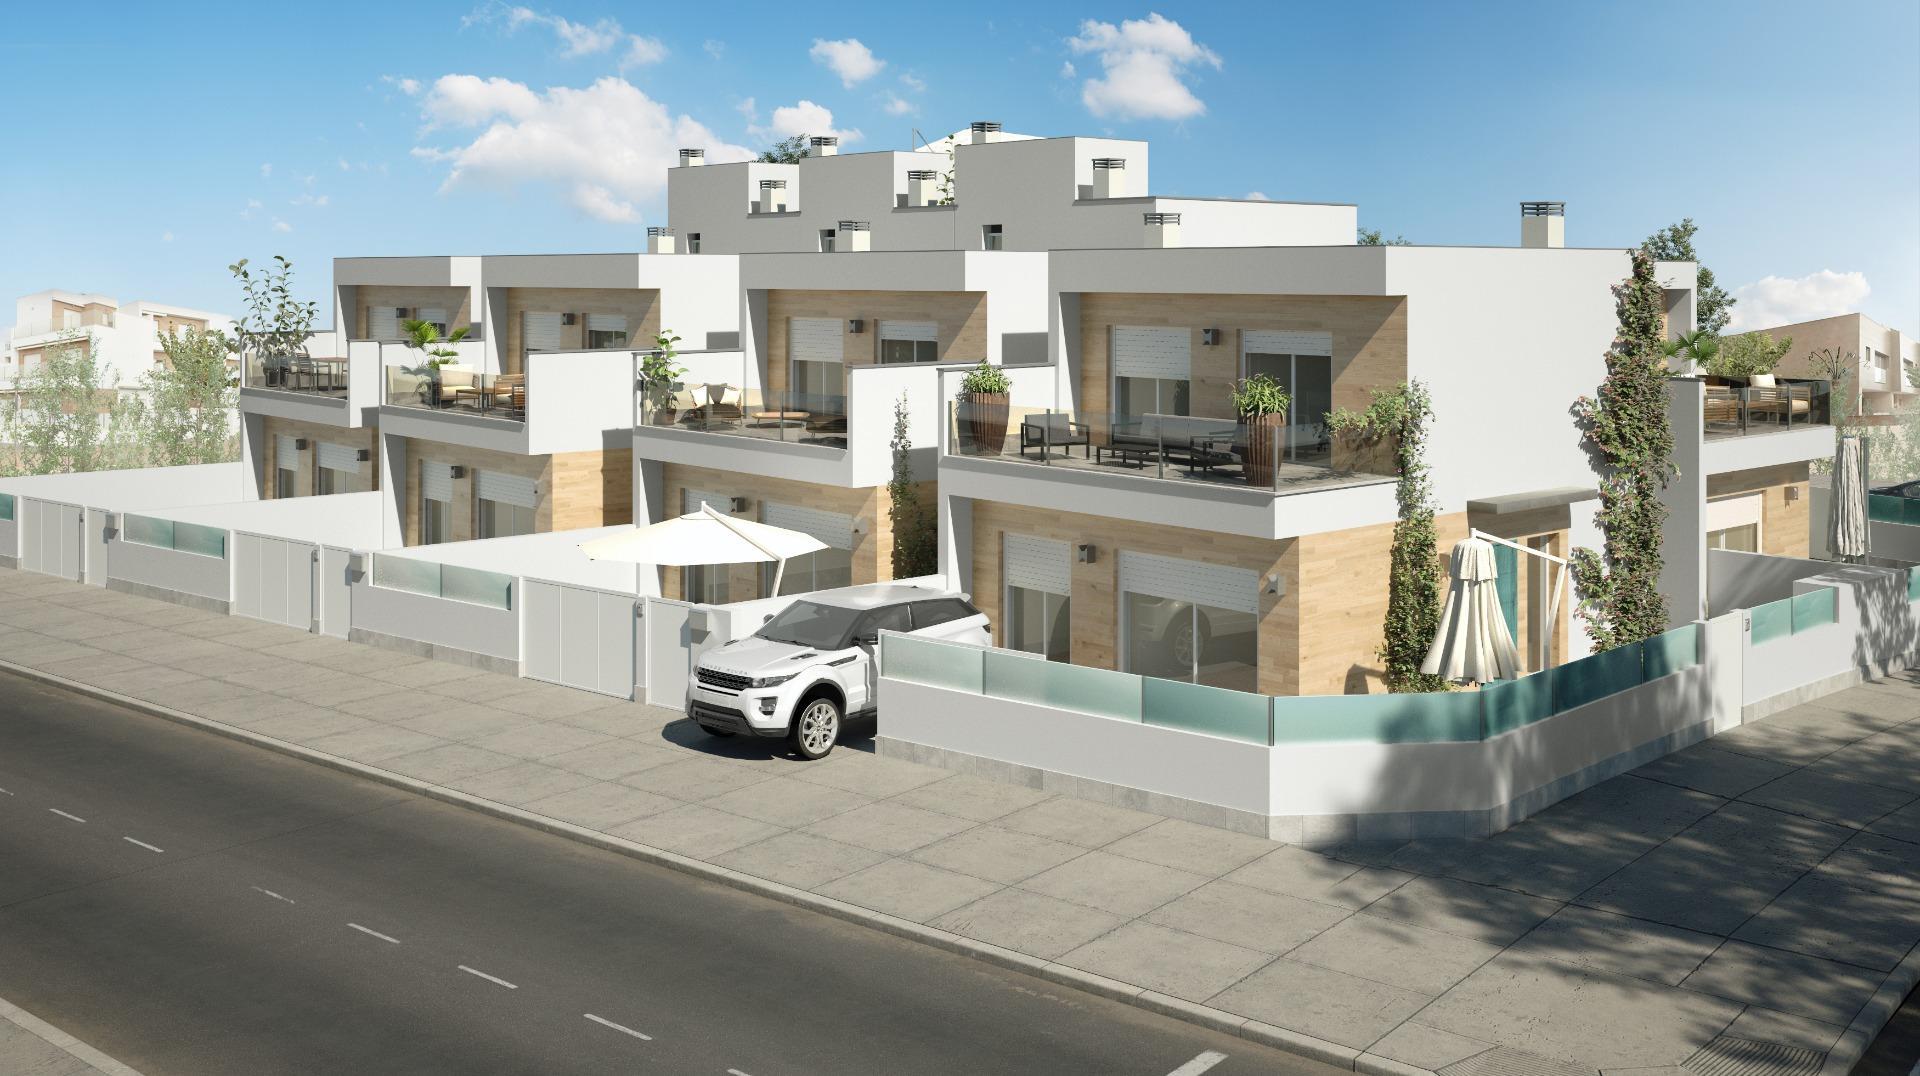 NEW BUILD VILLAS IN SAN PEDRO DEL PINATAR

New build development of 8 independent villas and semi-detached villas in San Pedro Pinatar, all with private swimming pool, terrace and parking space within the plot.

Each property has 3 bedrooms and 2 complete bathrooms, open plan kitchen with spacious living room, fitted wardrobes.

San Pedro del Pinatar's privileged location on the Mar Menor and Mediterranean coastline it attracts those with an interest in sailing and water sports, providing marina mooring and sailing clubs, while the beaches and natural mud baths attract those seeking safe sun, sea and sand.

San Pedro del Pinatar has an established community and offers an excellent range of activities, including covered swimming pool and sports facilities, as well as a year
round programme of social activities by the pleasant winter weather. The benefits of the mud baths, typical of the region, or the calm waters of the Mar Menor, have favoured the growth of Lo Pagán, wich currently has all kind of amenities. In addition, it has an excellent location, just 5 minutes from the Comercial Center Dos Mares.